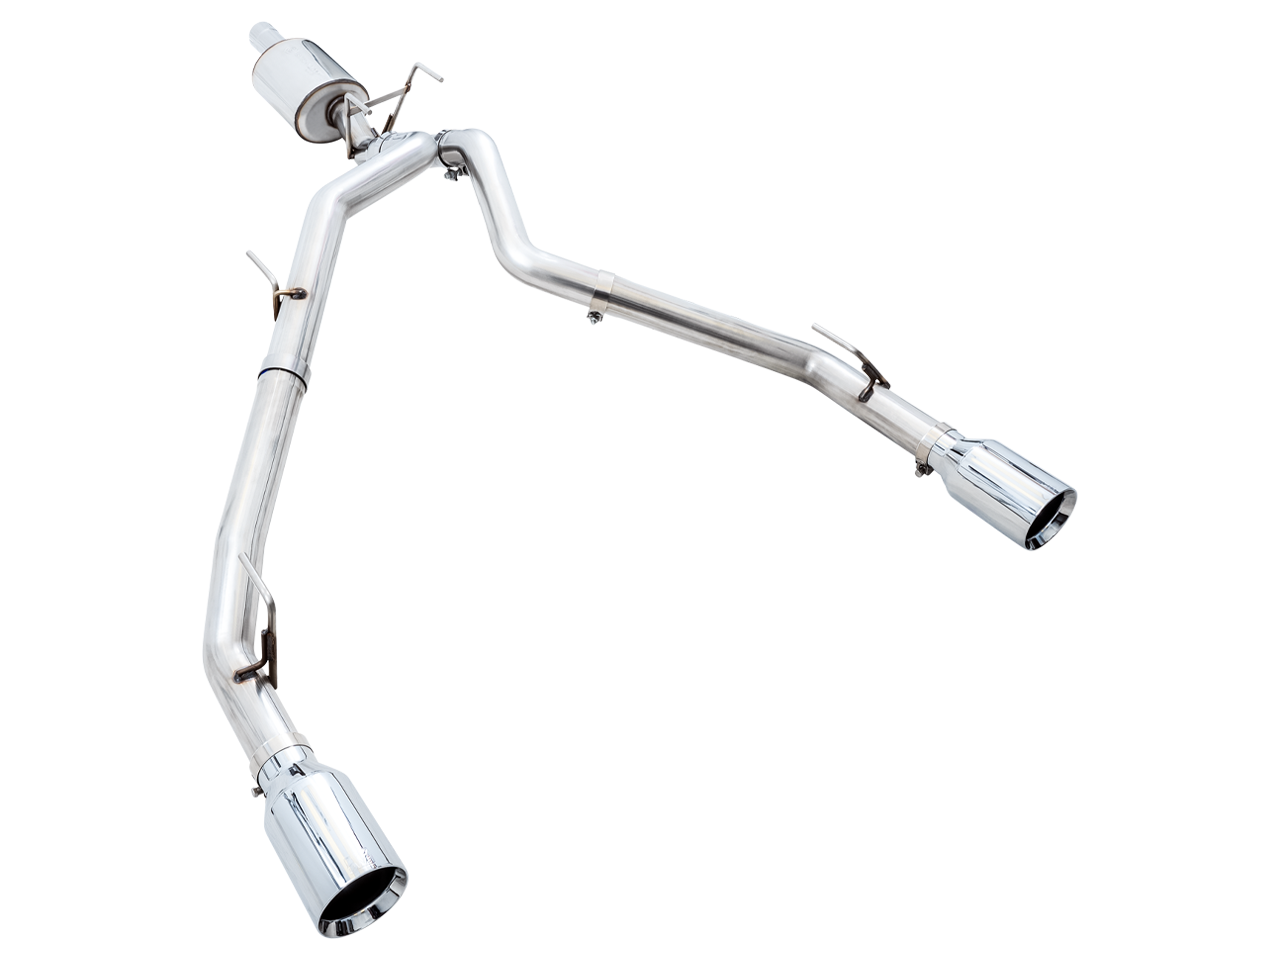 AWE 0FG Dual Rear Exit Catback Exhaust for 4th Gen RAM 1500 5.7L (without bumper cutouts) - Chrome Silver Tips (3015-32101)